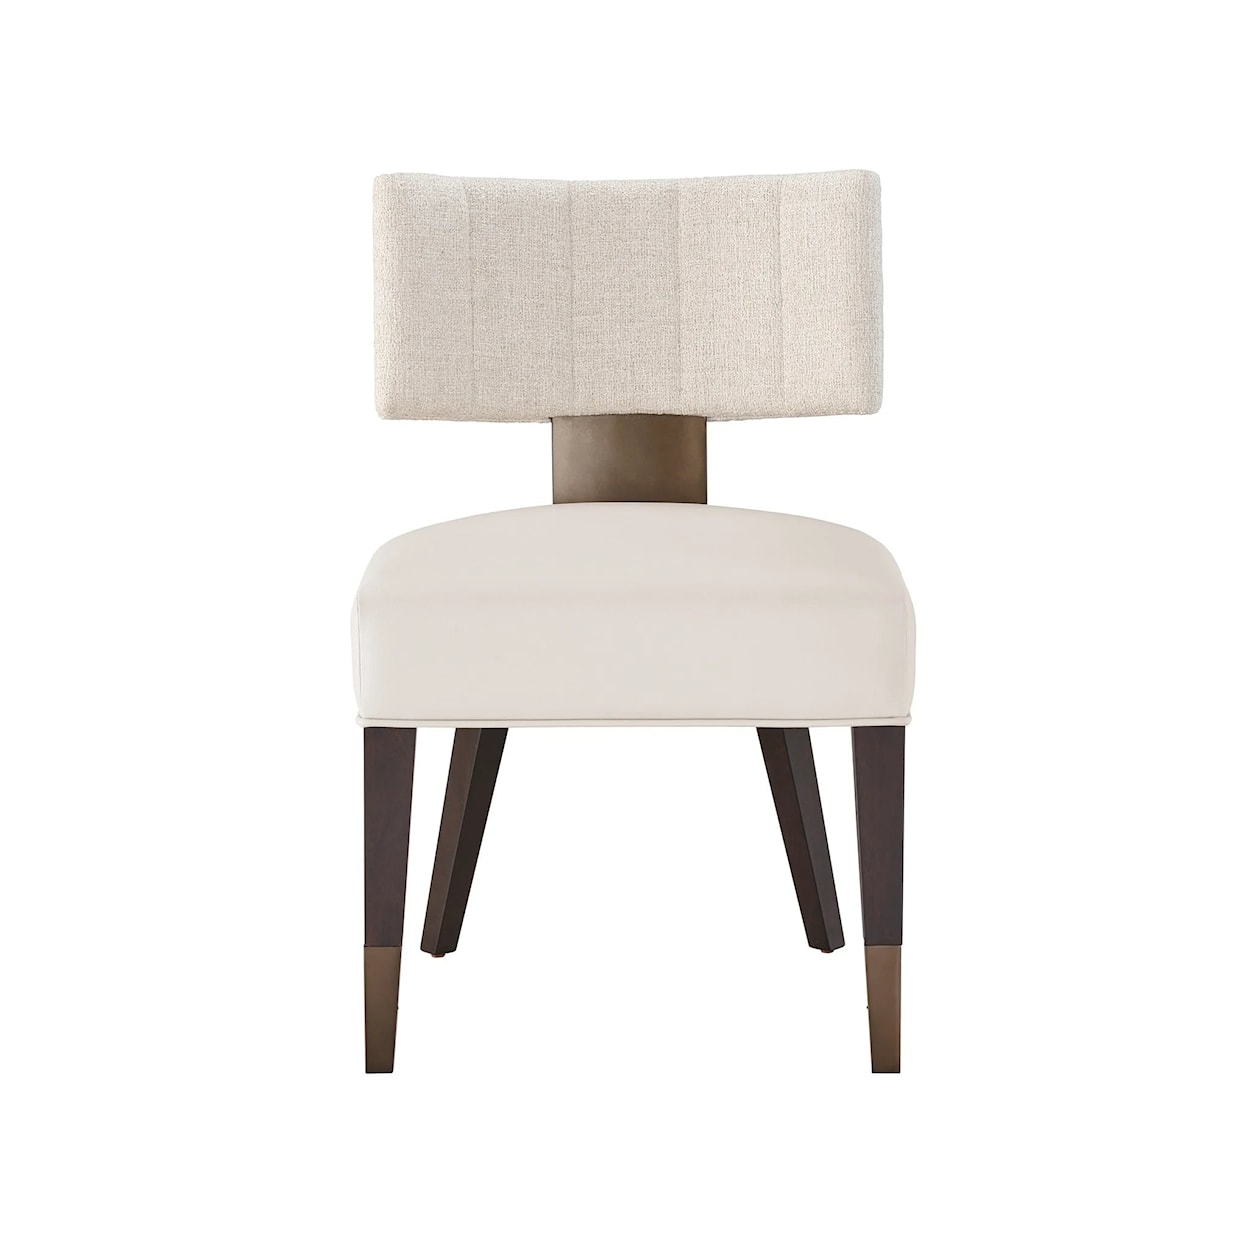 Universal ErinnV x Universal Upholstered Dining Room Chair